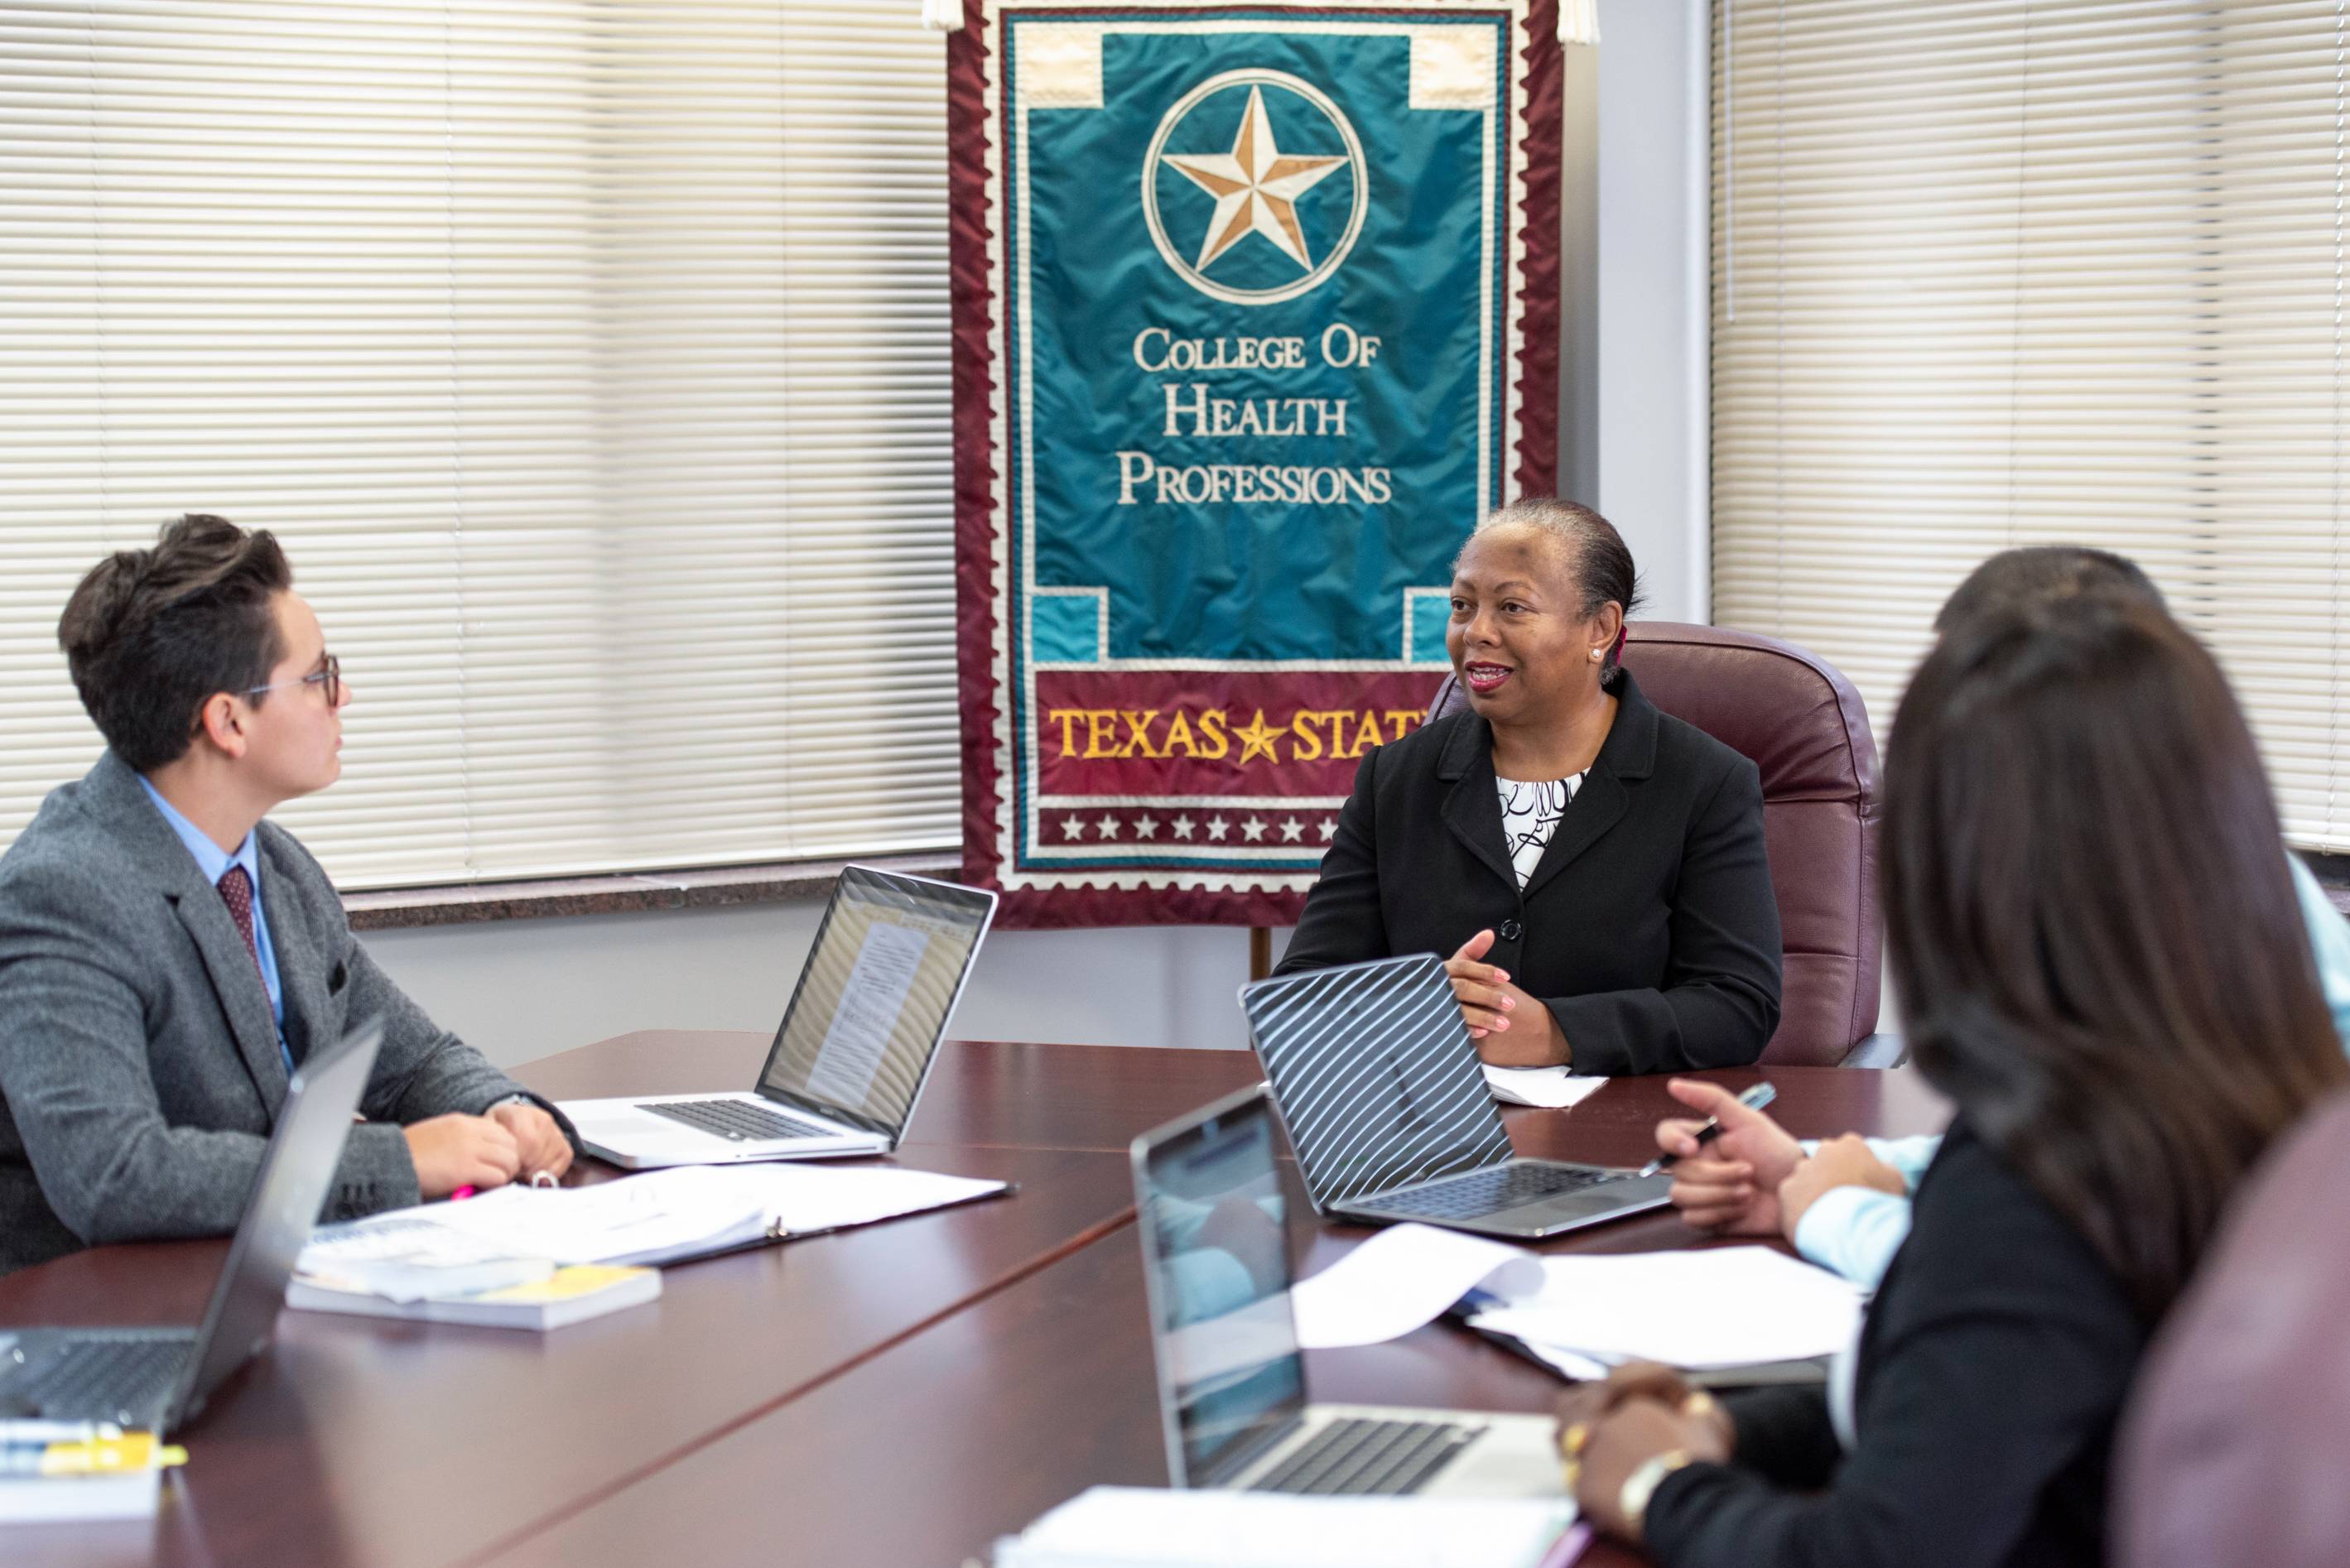 ‘Money’ magazine names Texas State’s health administration
master’s program among best in U.S.